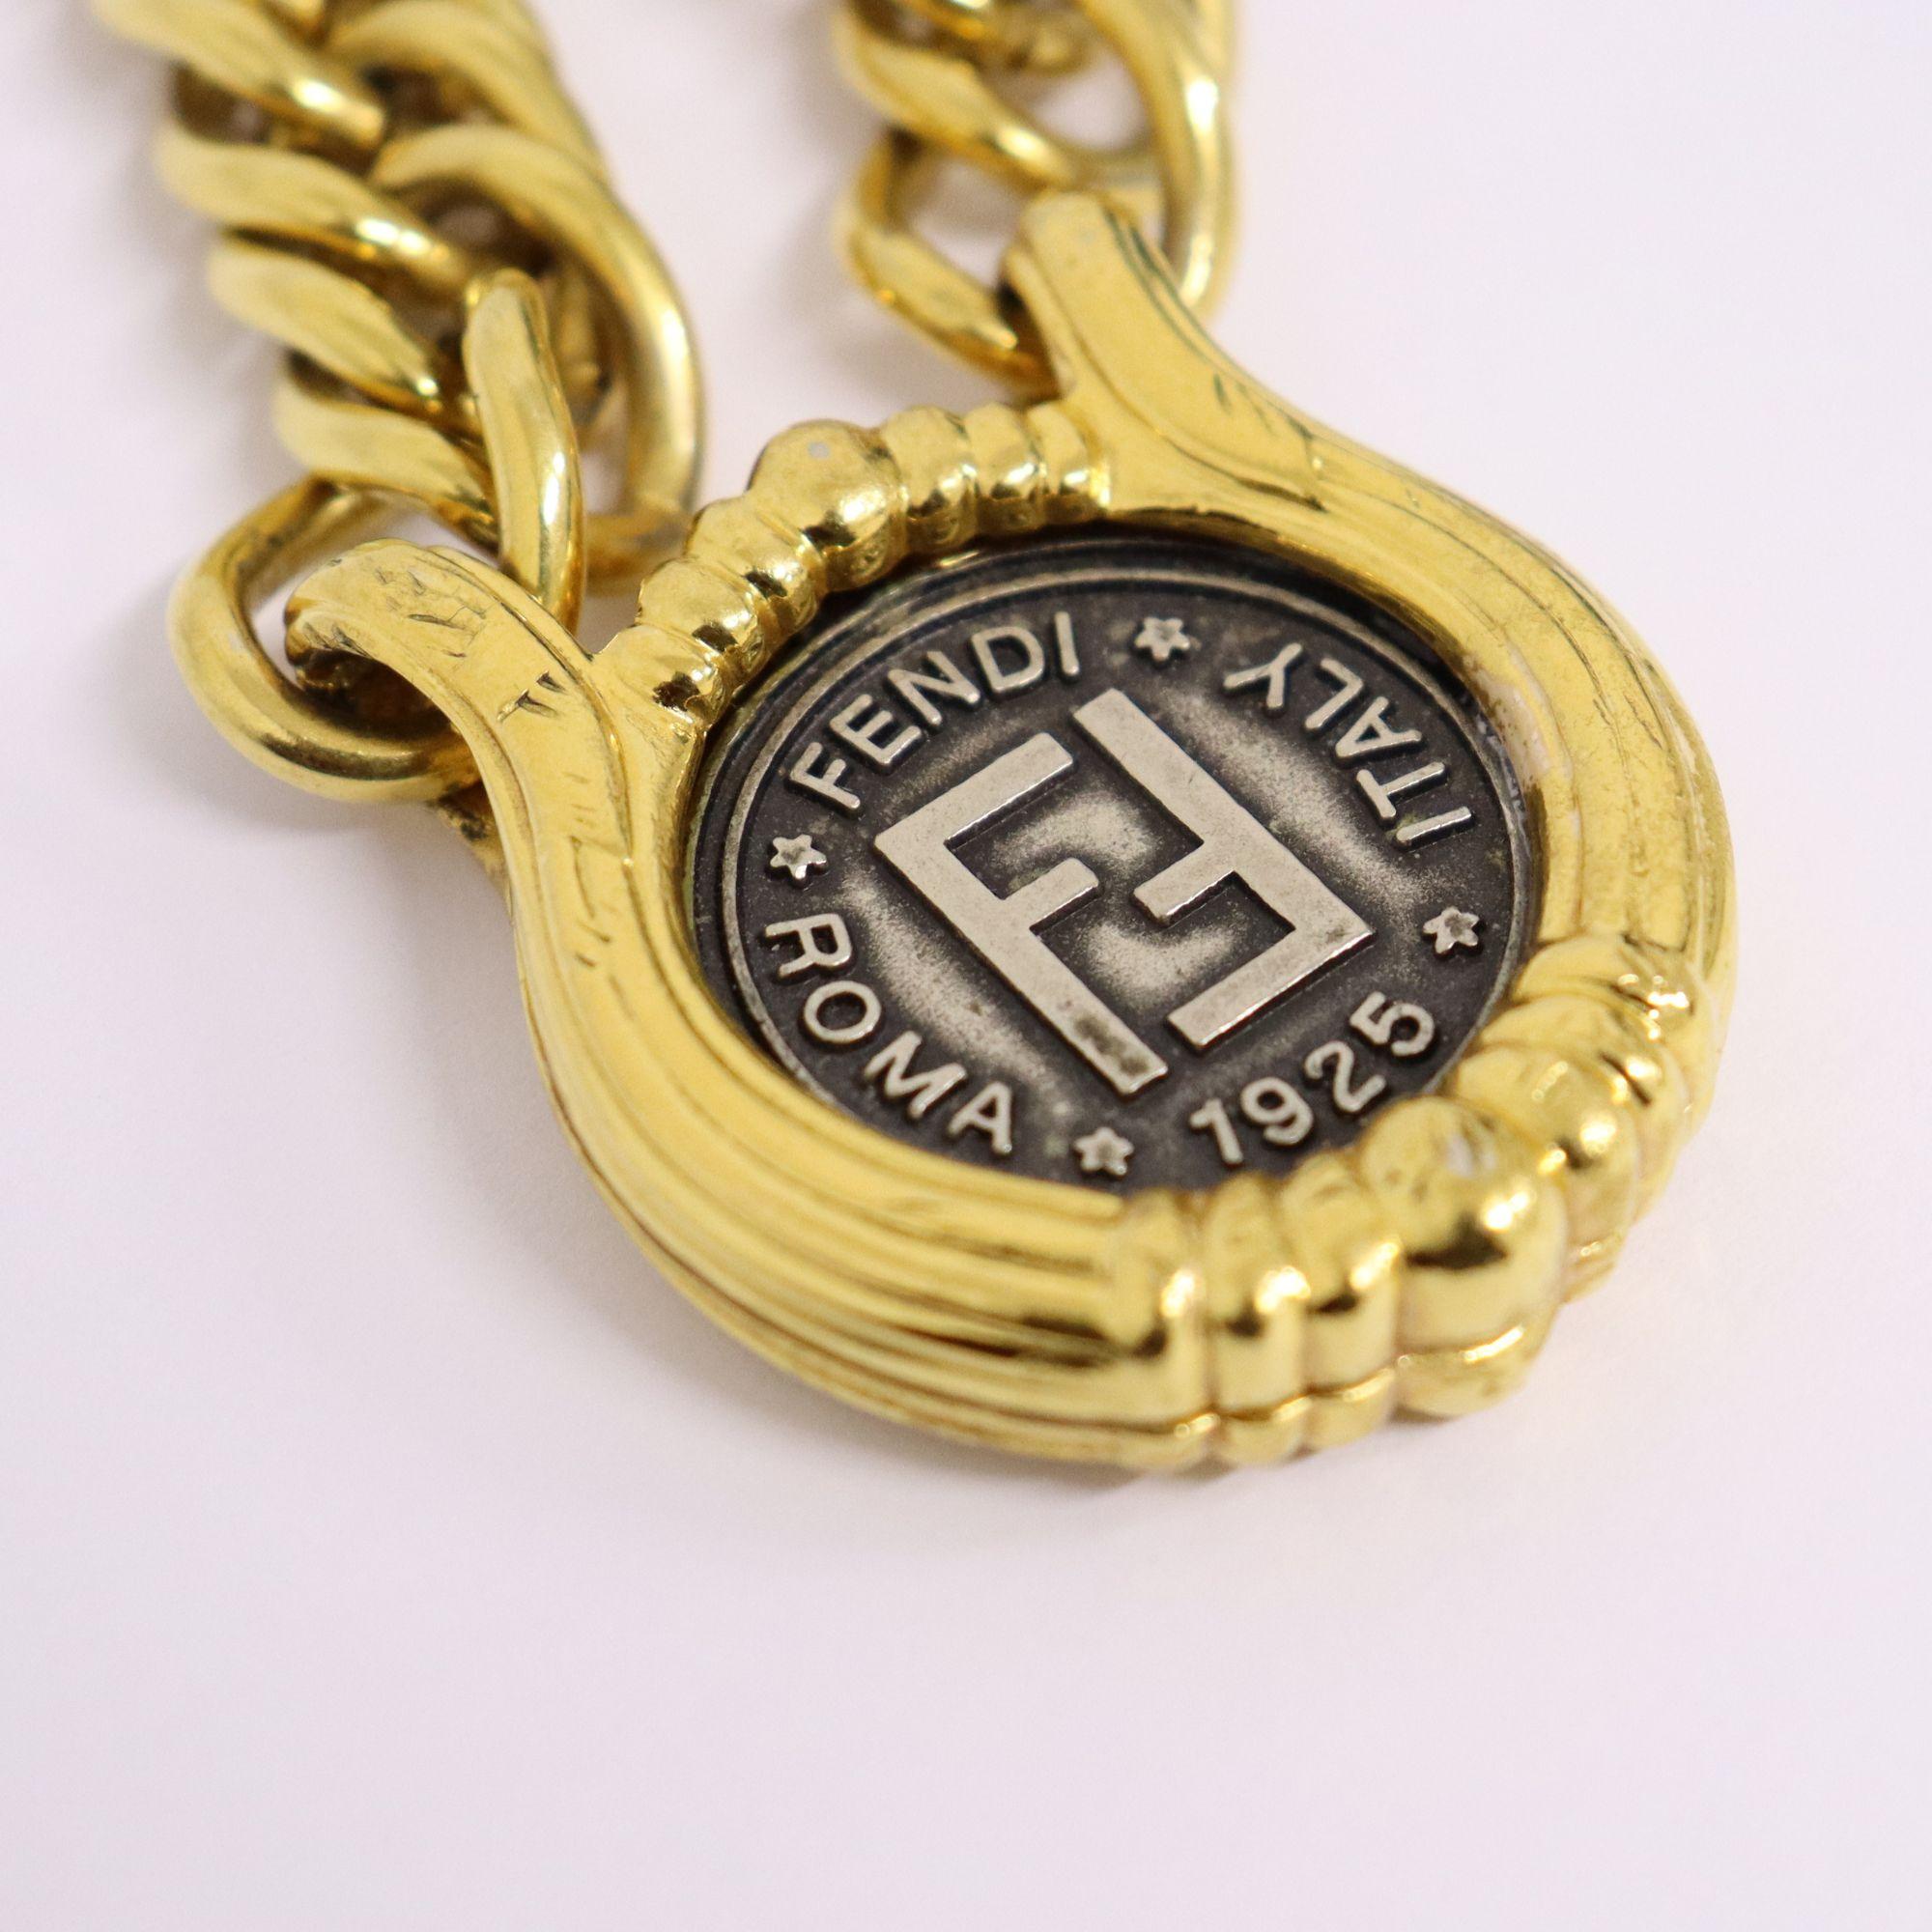 Vintage Fendi Gold Plated Coin Pendant Chain Necklace.
Circa 1980's.
Coin pendant features Roman God Janus looking to the past and future with 